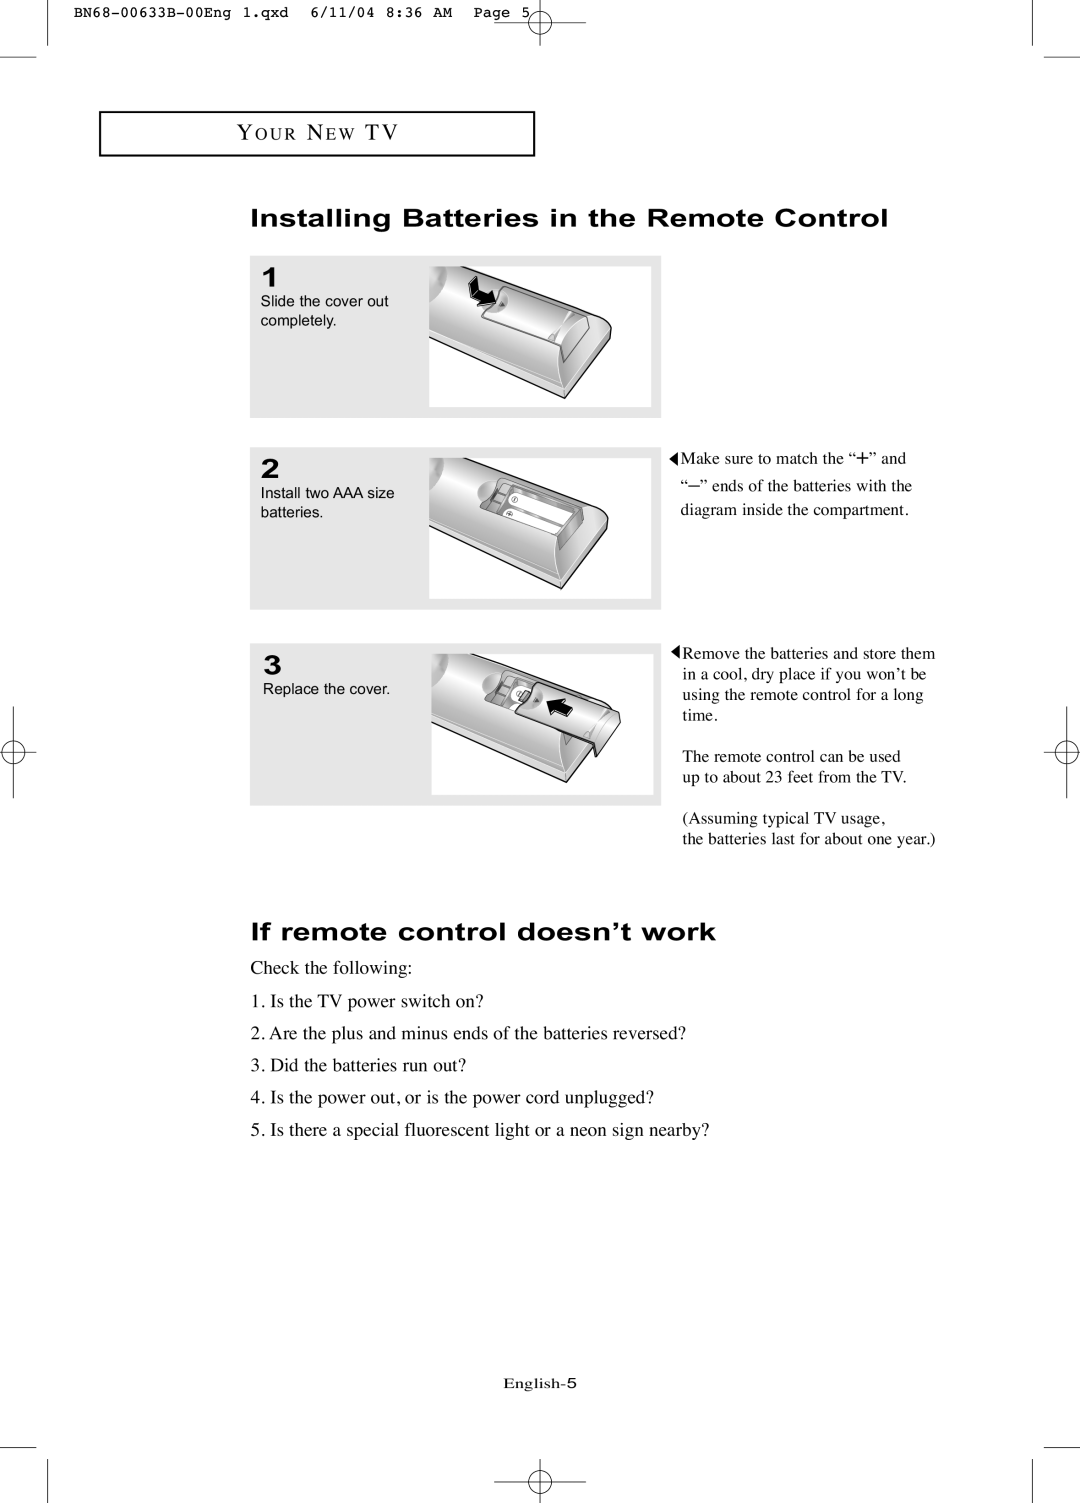 Samsung LT-P1545 manual Installing Batteries in the Remote Control, If remote control doesn’t work 